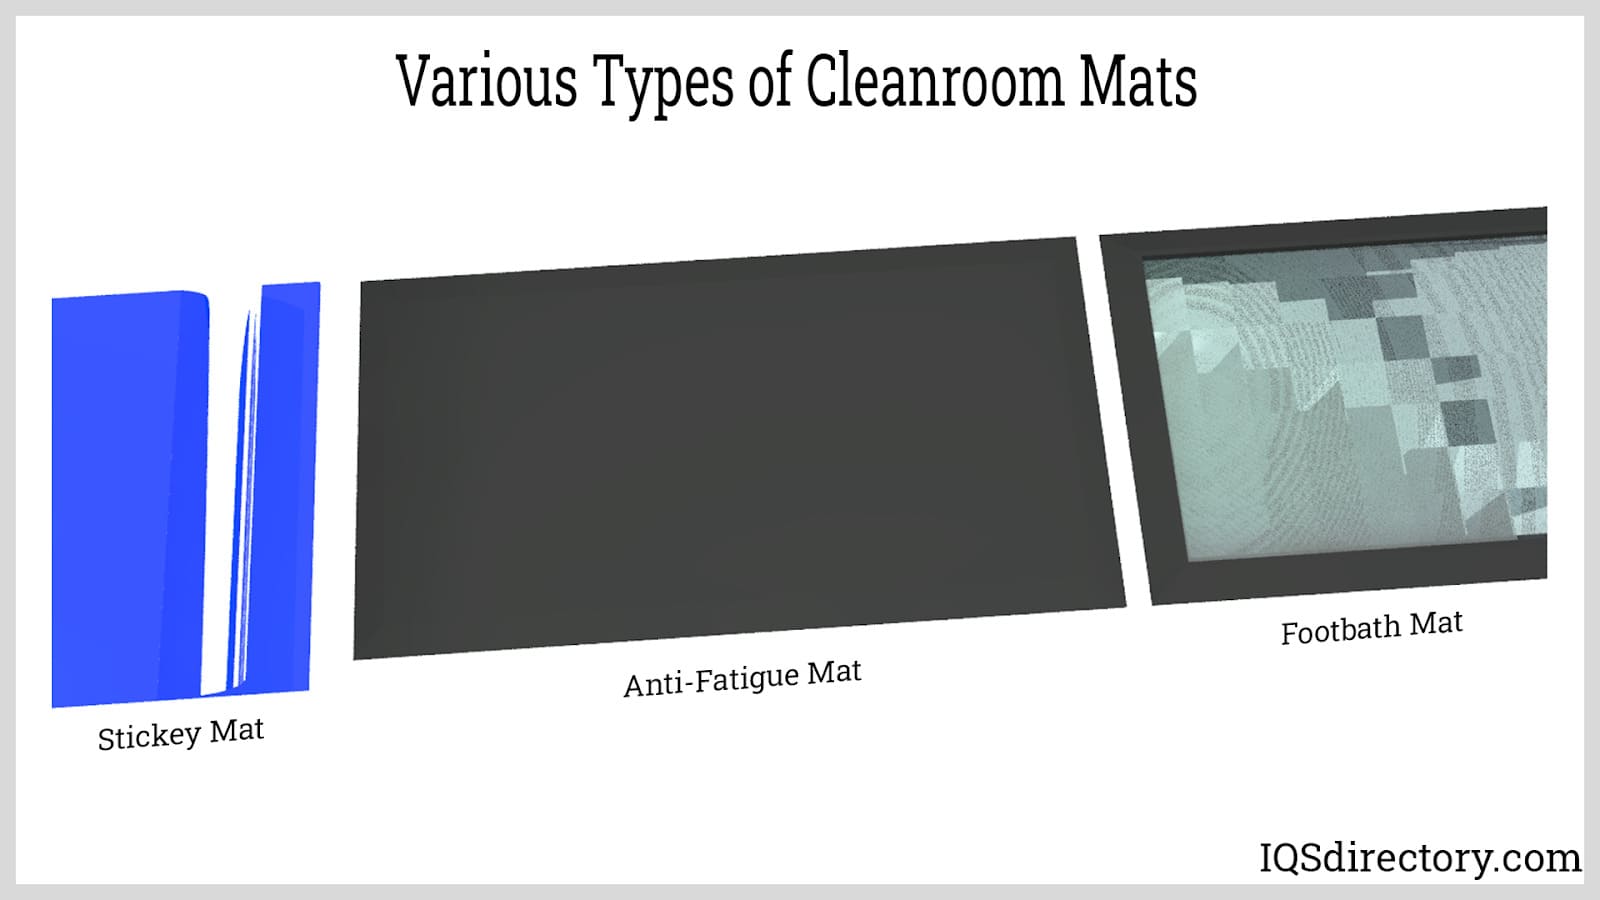 Various Types of Cleanroom Mats